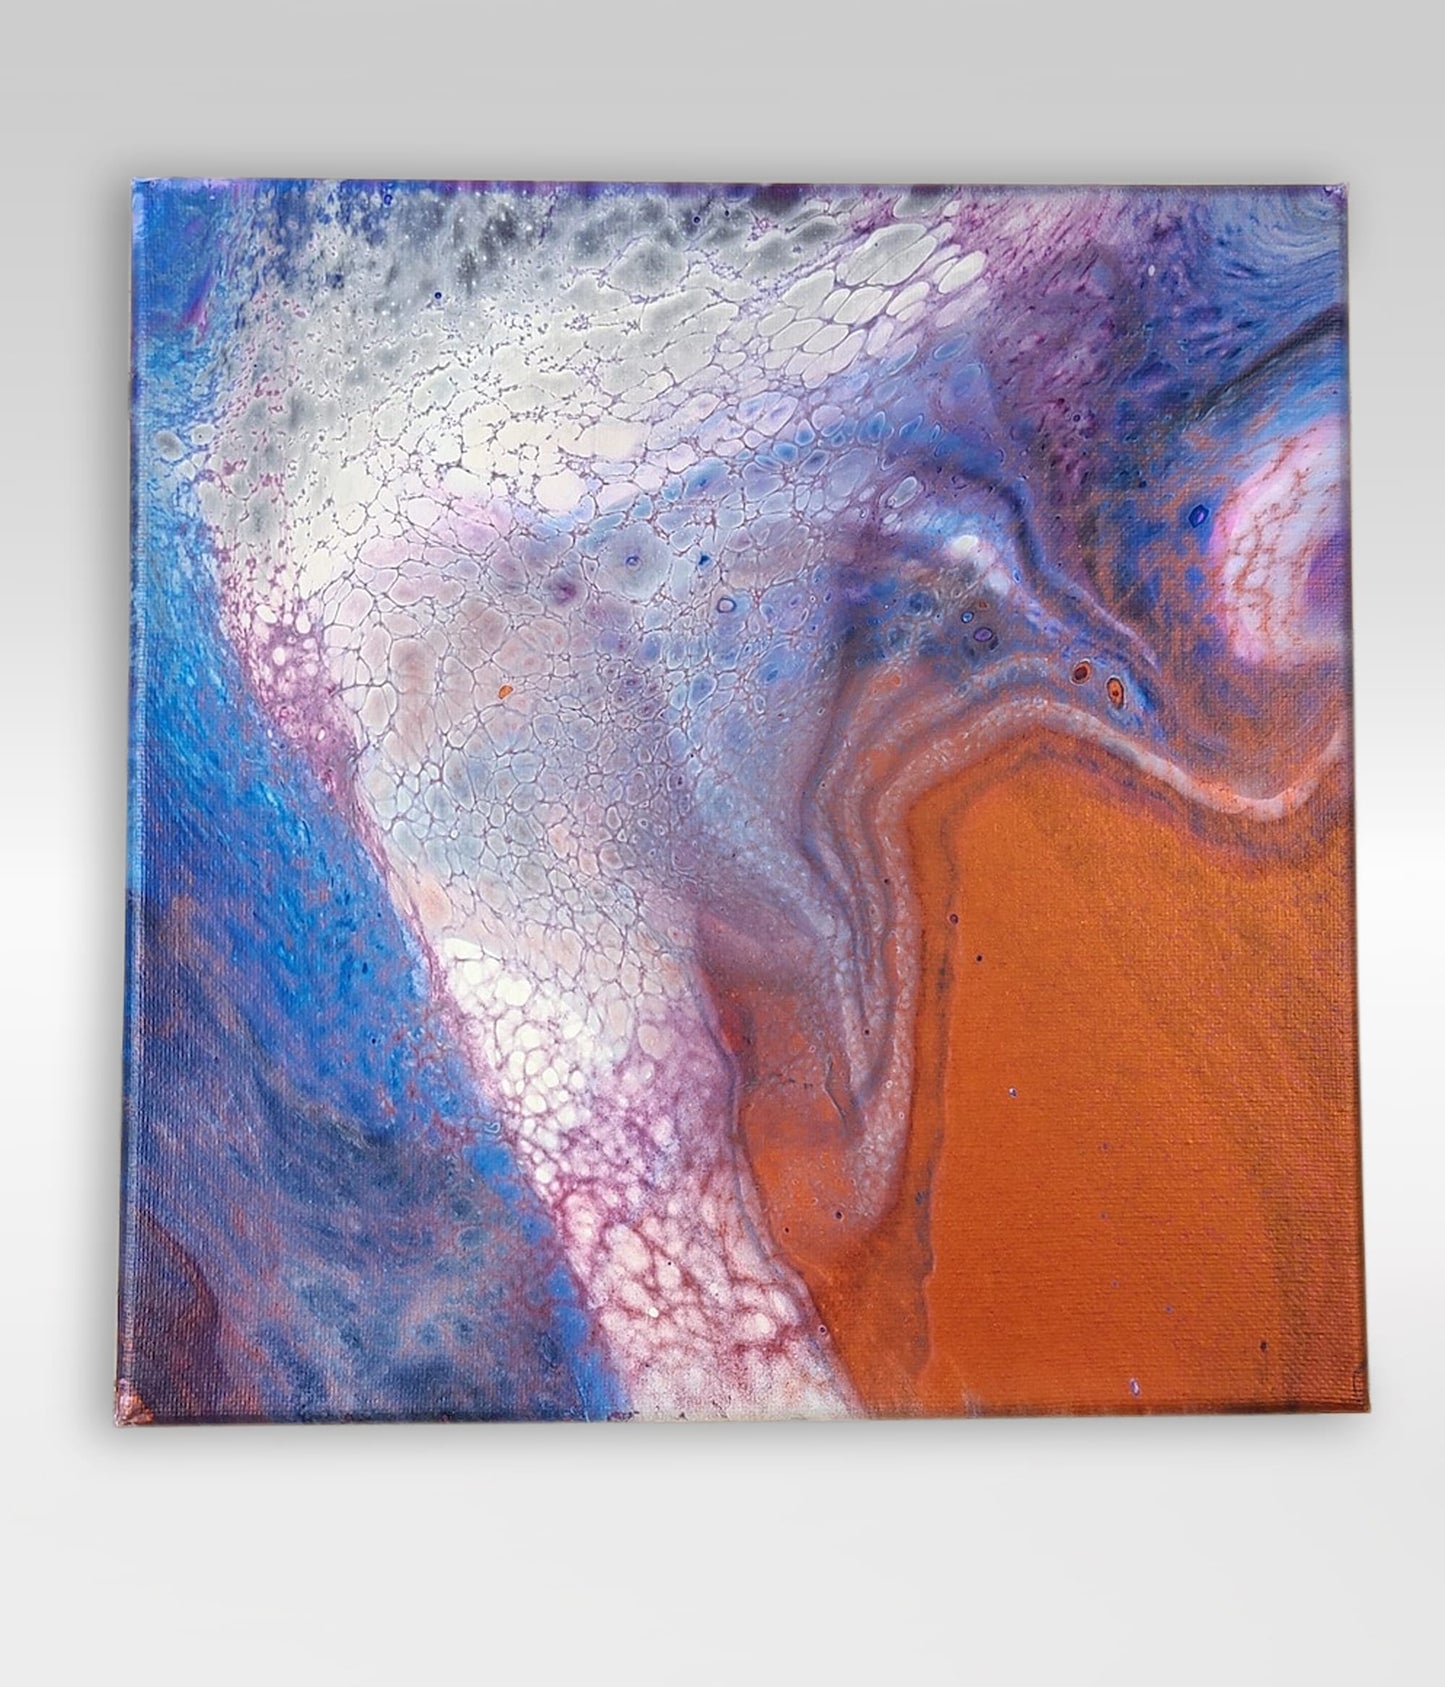 Appauled – 10 x 10 Acrylic Pour Painting On Canvas